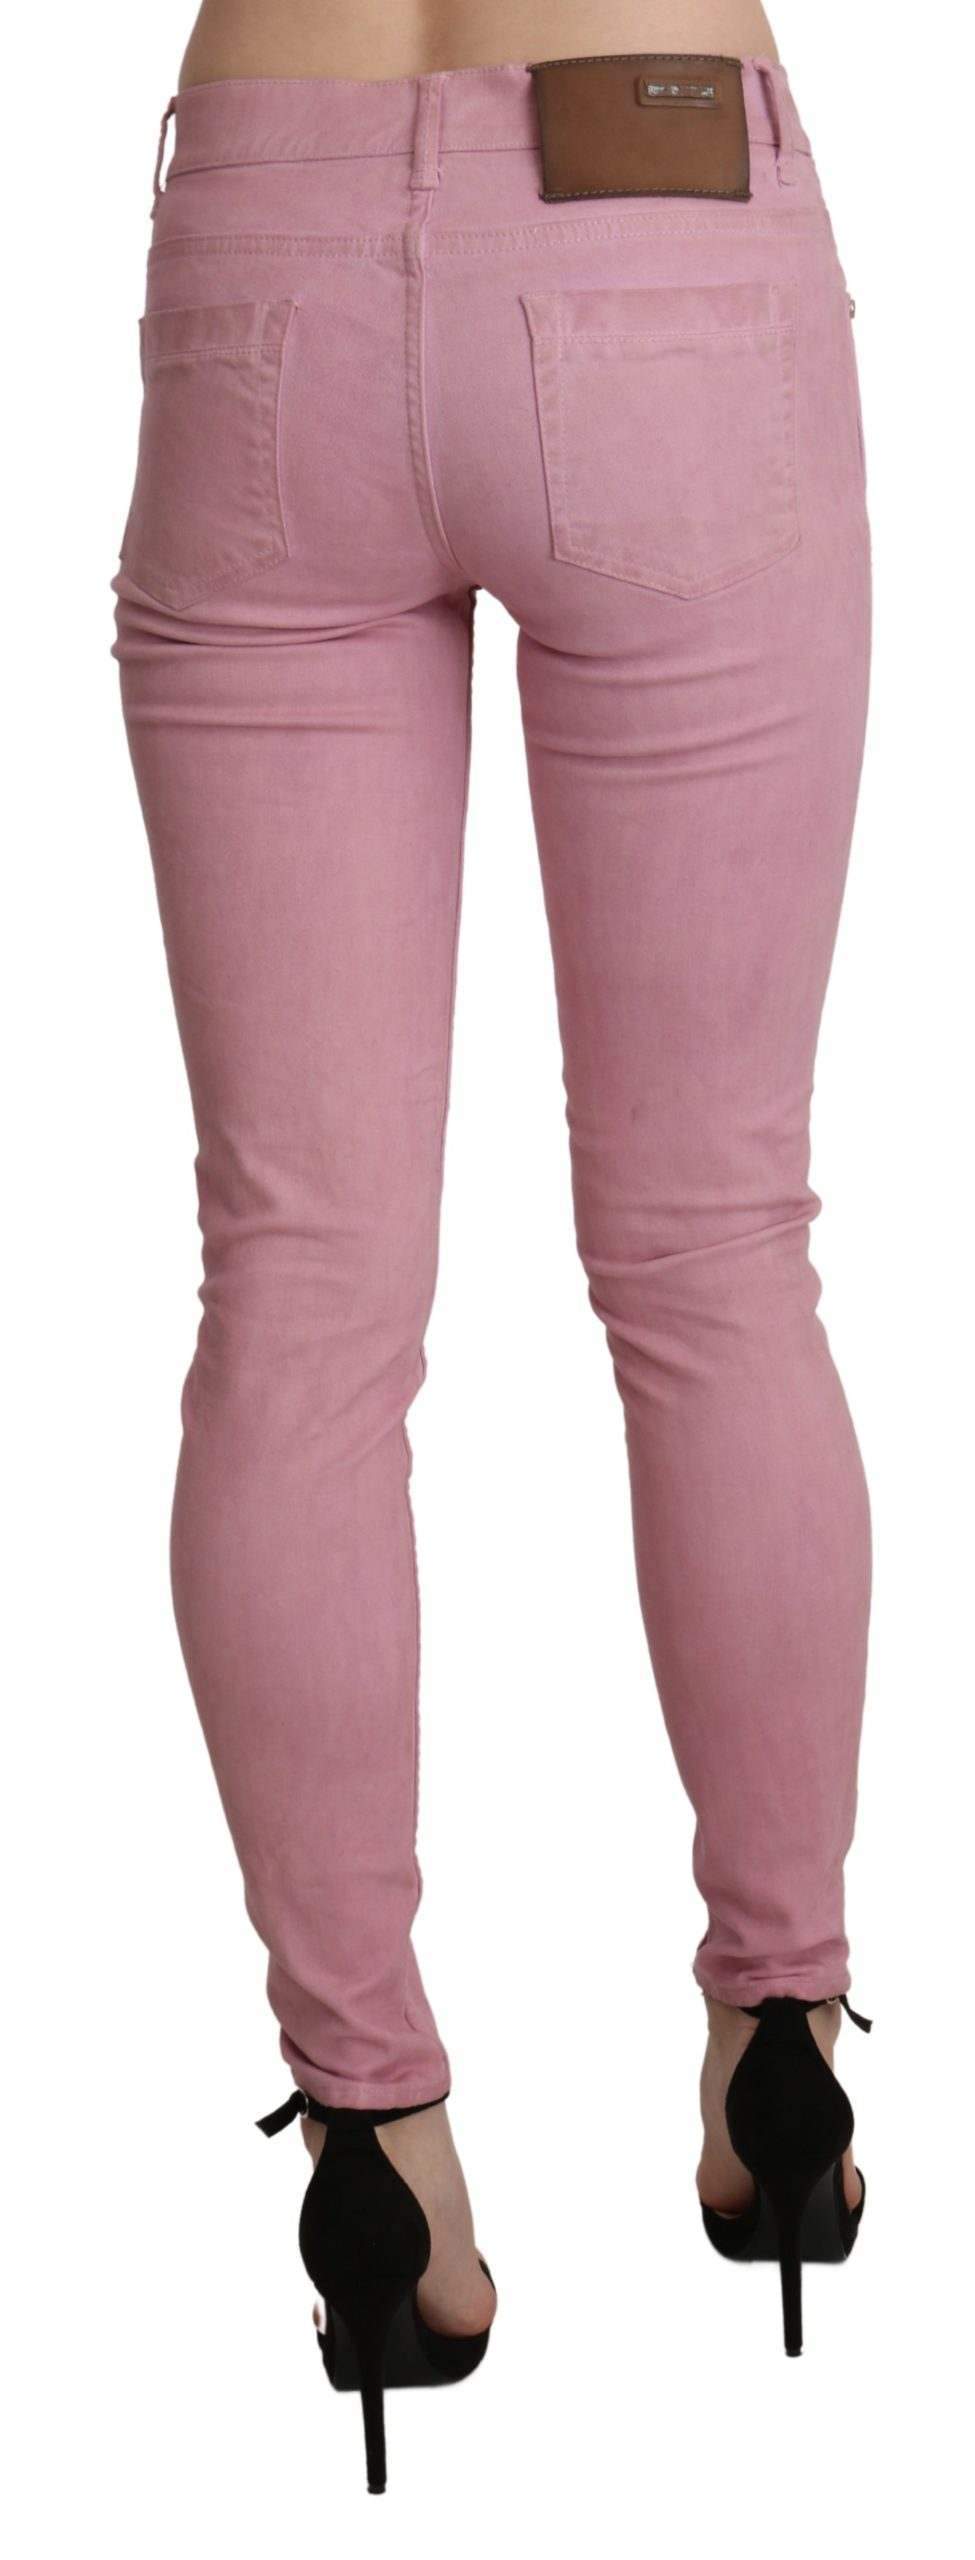 Acht Pink Mid Waist Skinny Stretch  Denim Pant #women, Acht, feed-agegroup-adult, feed-color-pink, feed-gender-female, feed-size-W26, Gender_Women, Jeans & Pants - Women - Clothing, Pink, W26, Women - New Arrivals at SEYMAYKA